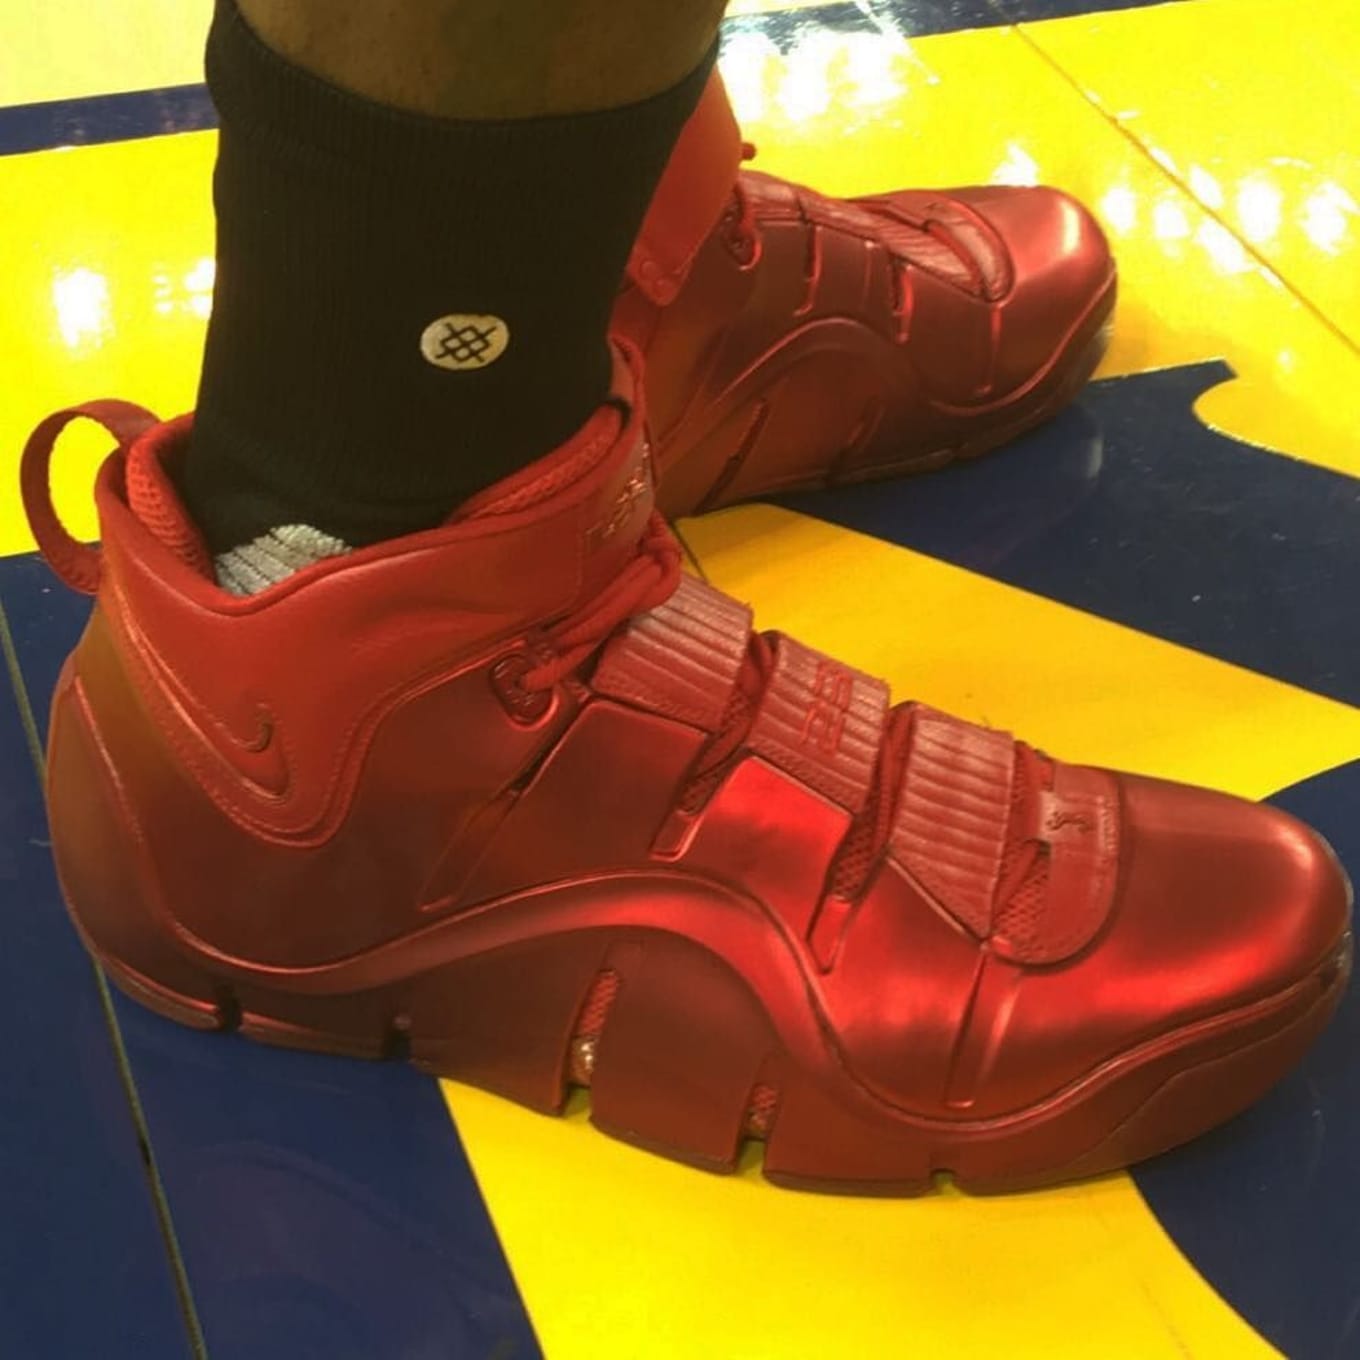 lebron all red